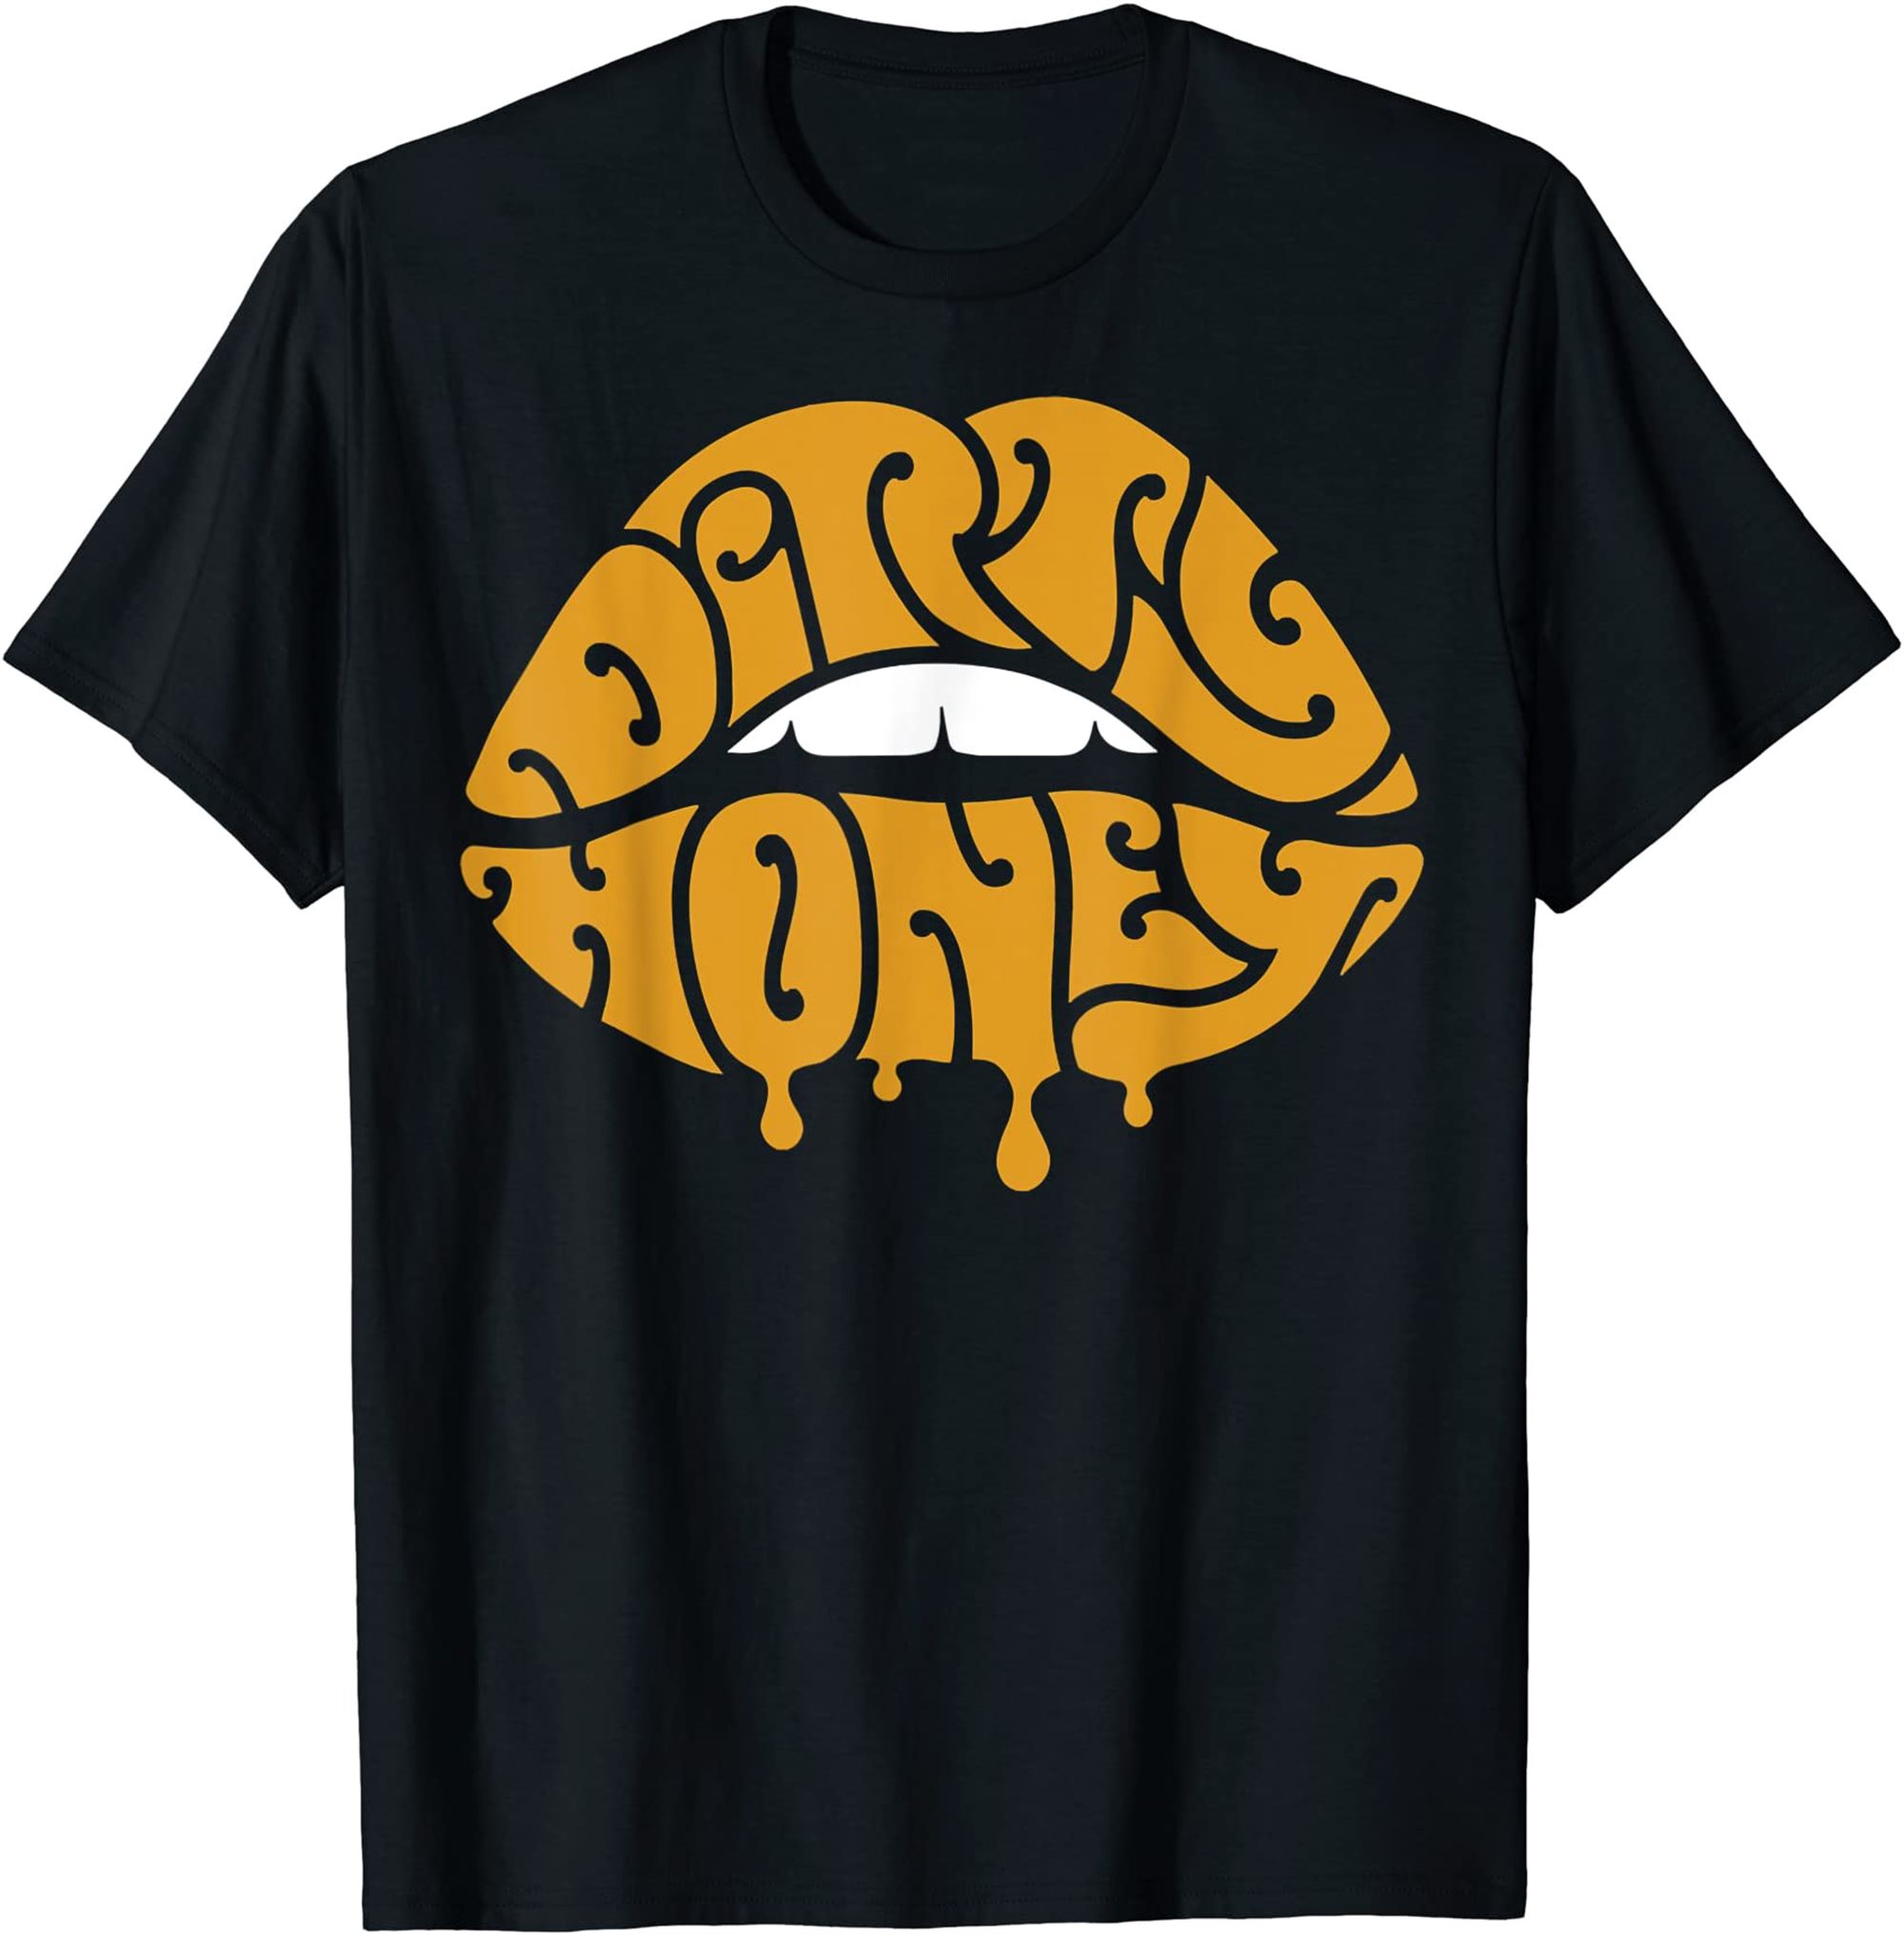 Dirty Honey T-shirt Size Up To 5xl